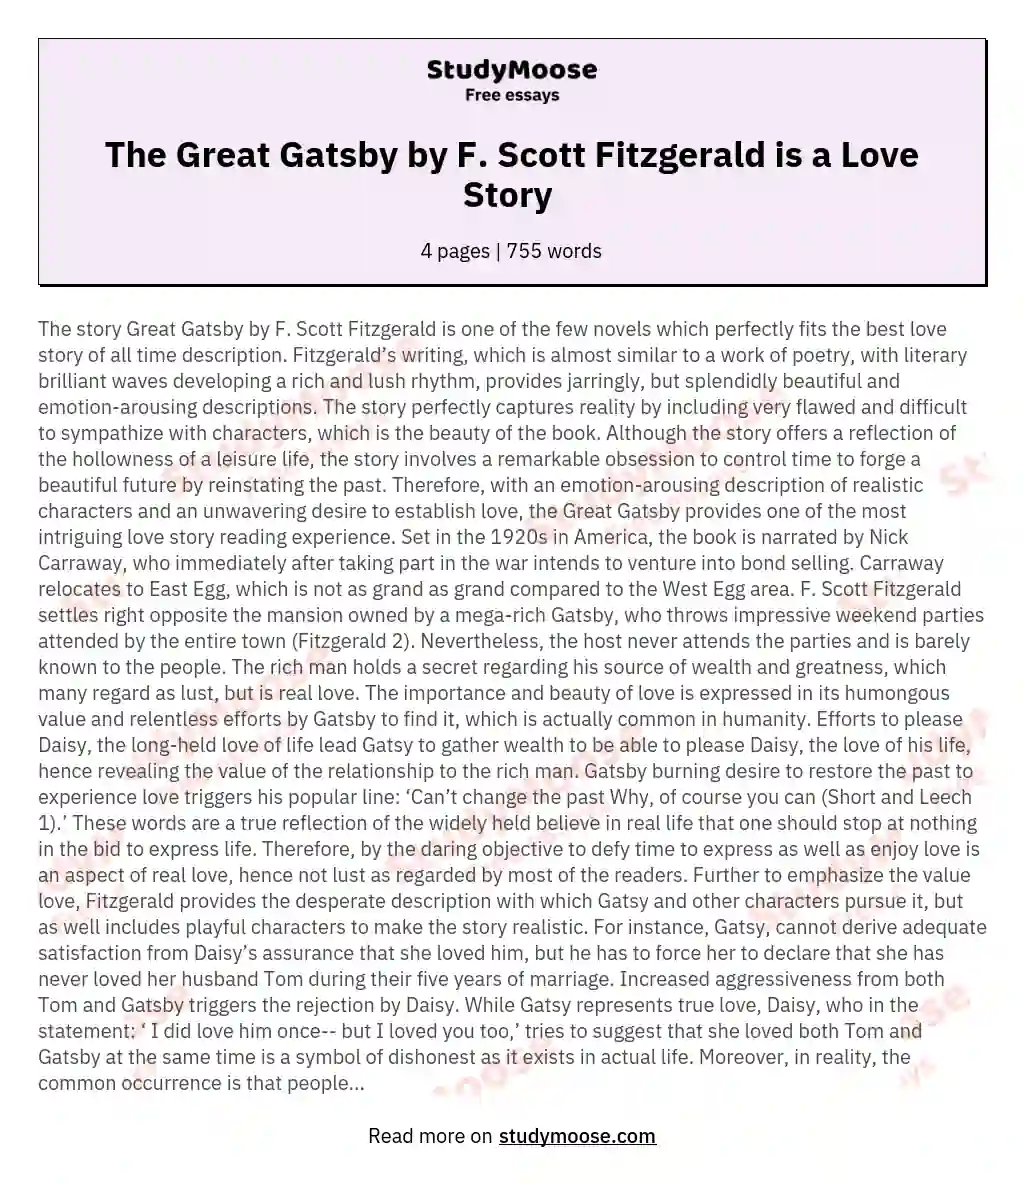 The Great Gatsby by F. Scott Fitzgerald is a Love Story  essay